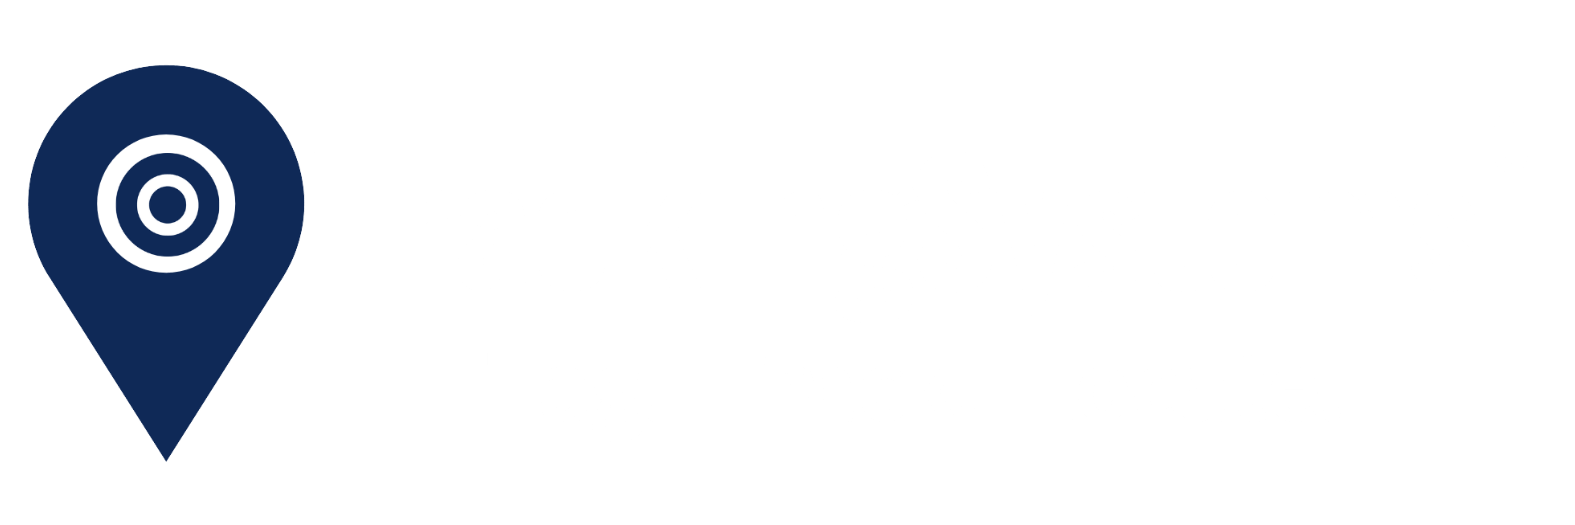 TrackingSystemsIoT